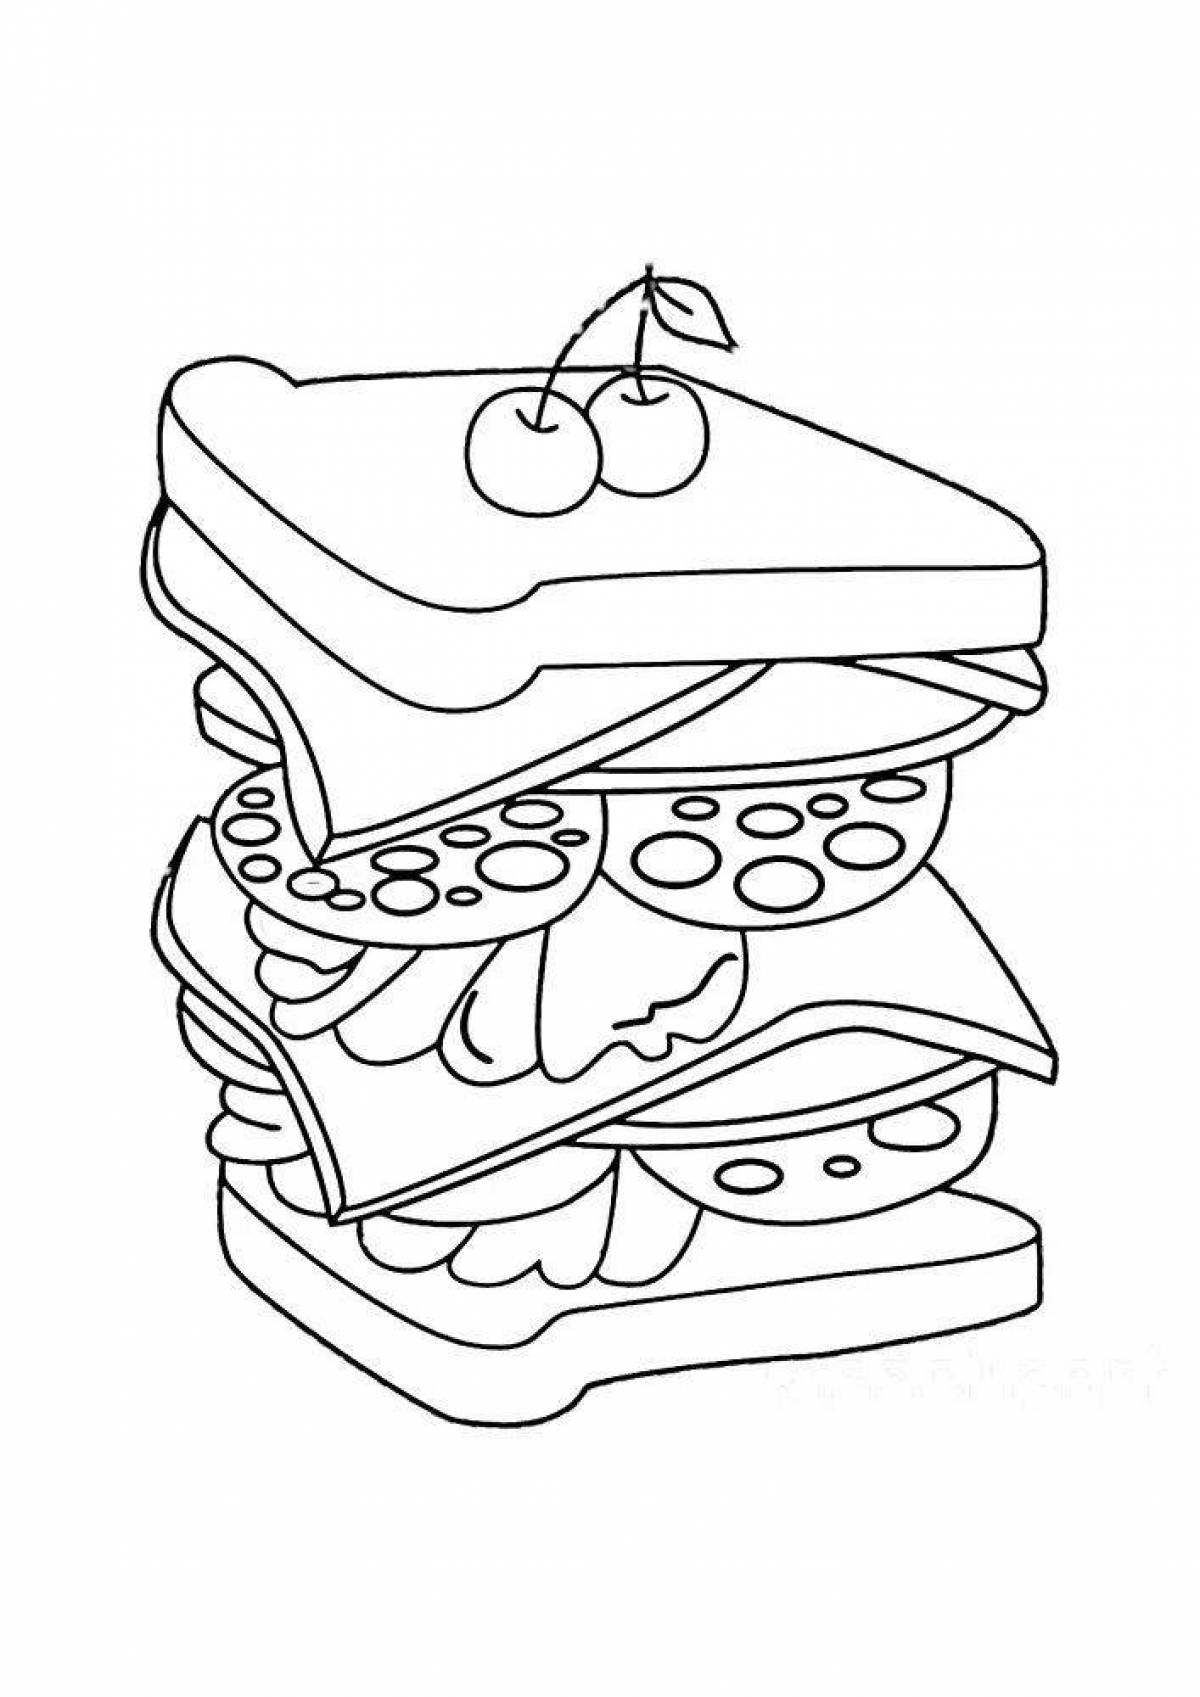 Coloring hearty sandwich